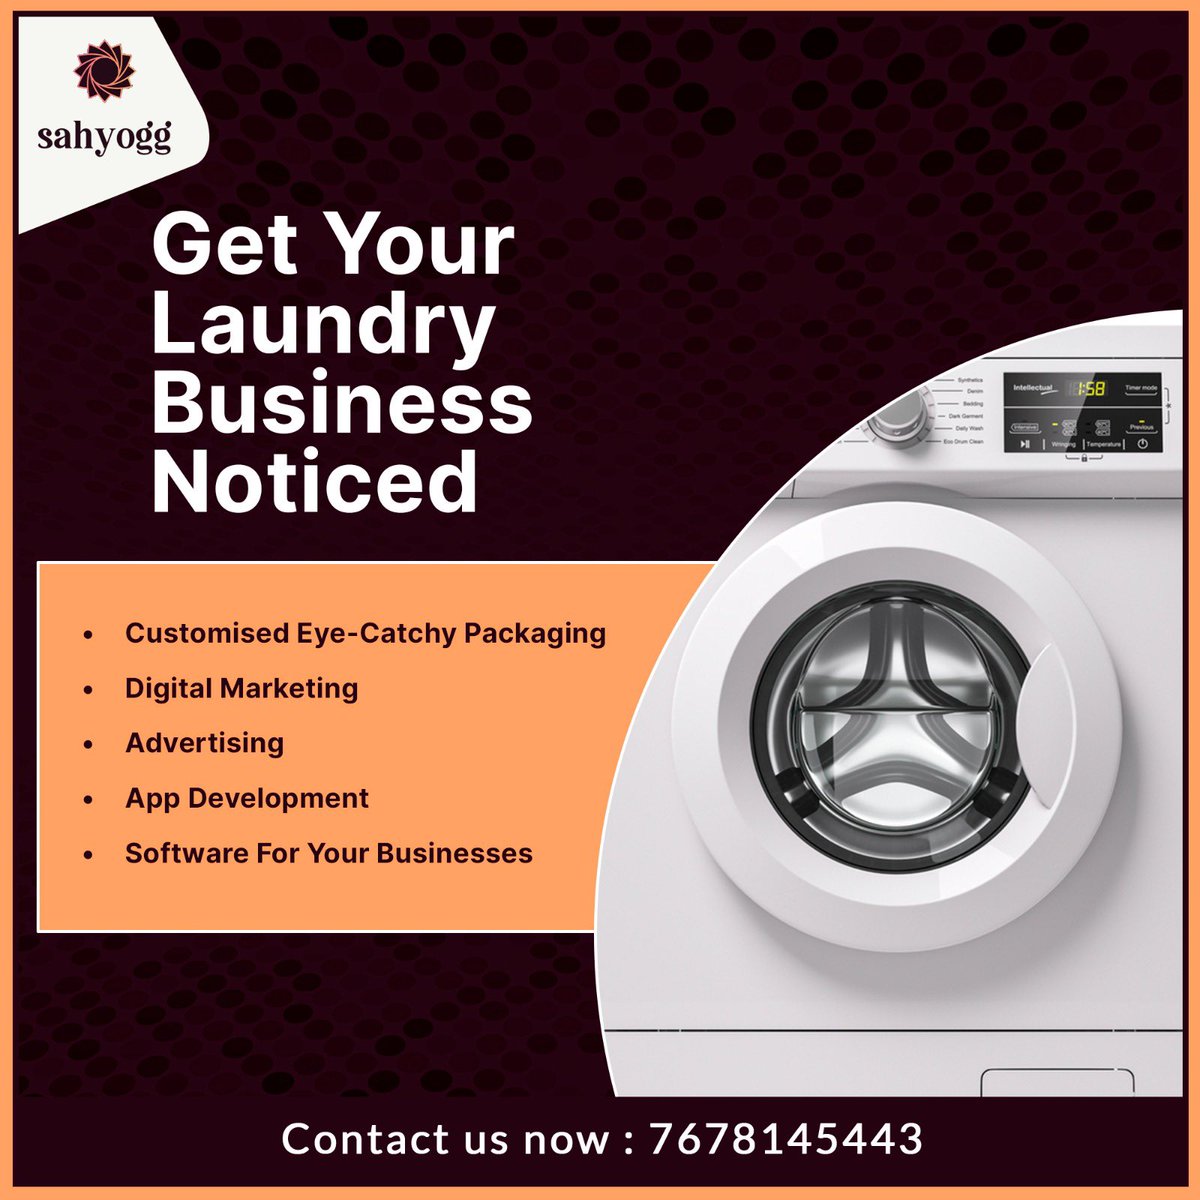 Get your Laundry Business noticed with us!
We are giving customised packages for all your needs. 
Call us now on 076781 45443

#Sahyogg #laundrybusiness #yourguide #laundry #drycleaning #drycleaningservice #foryou #yourlaundrypartner #yourconsultant